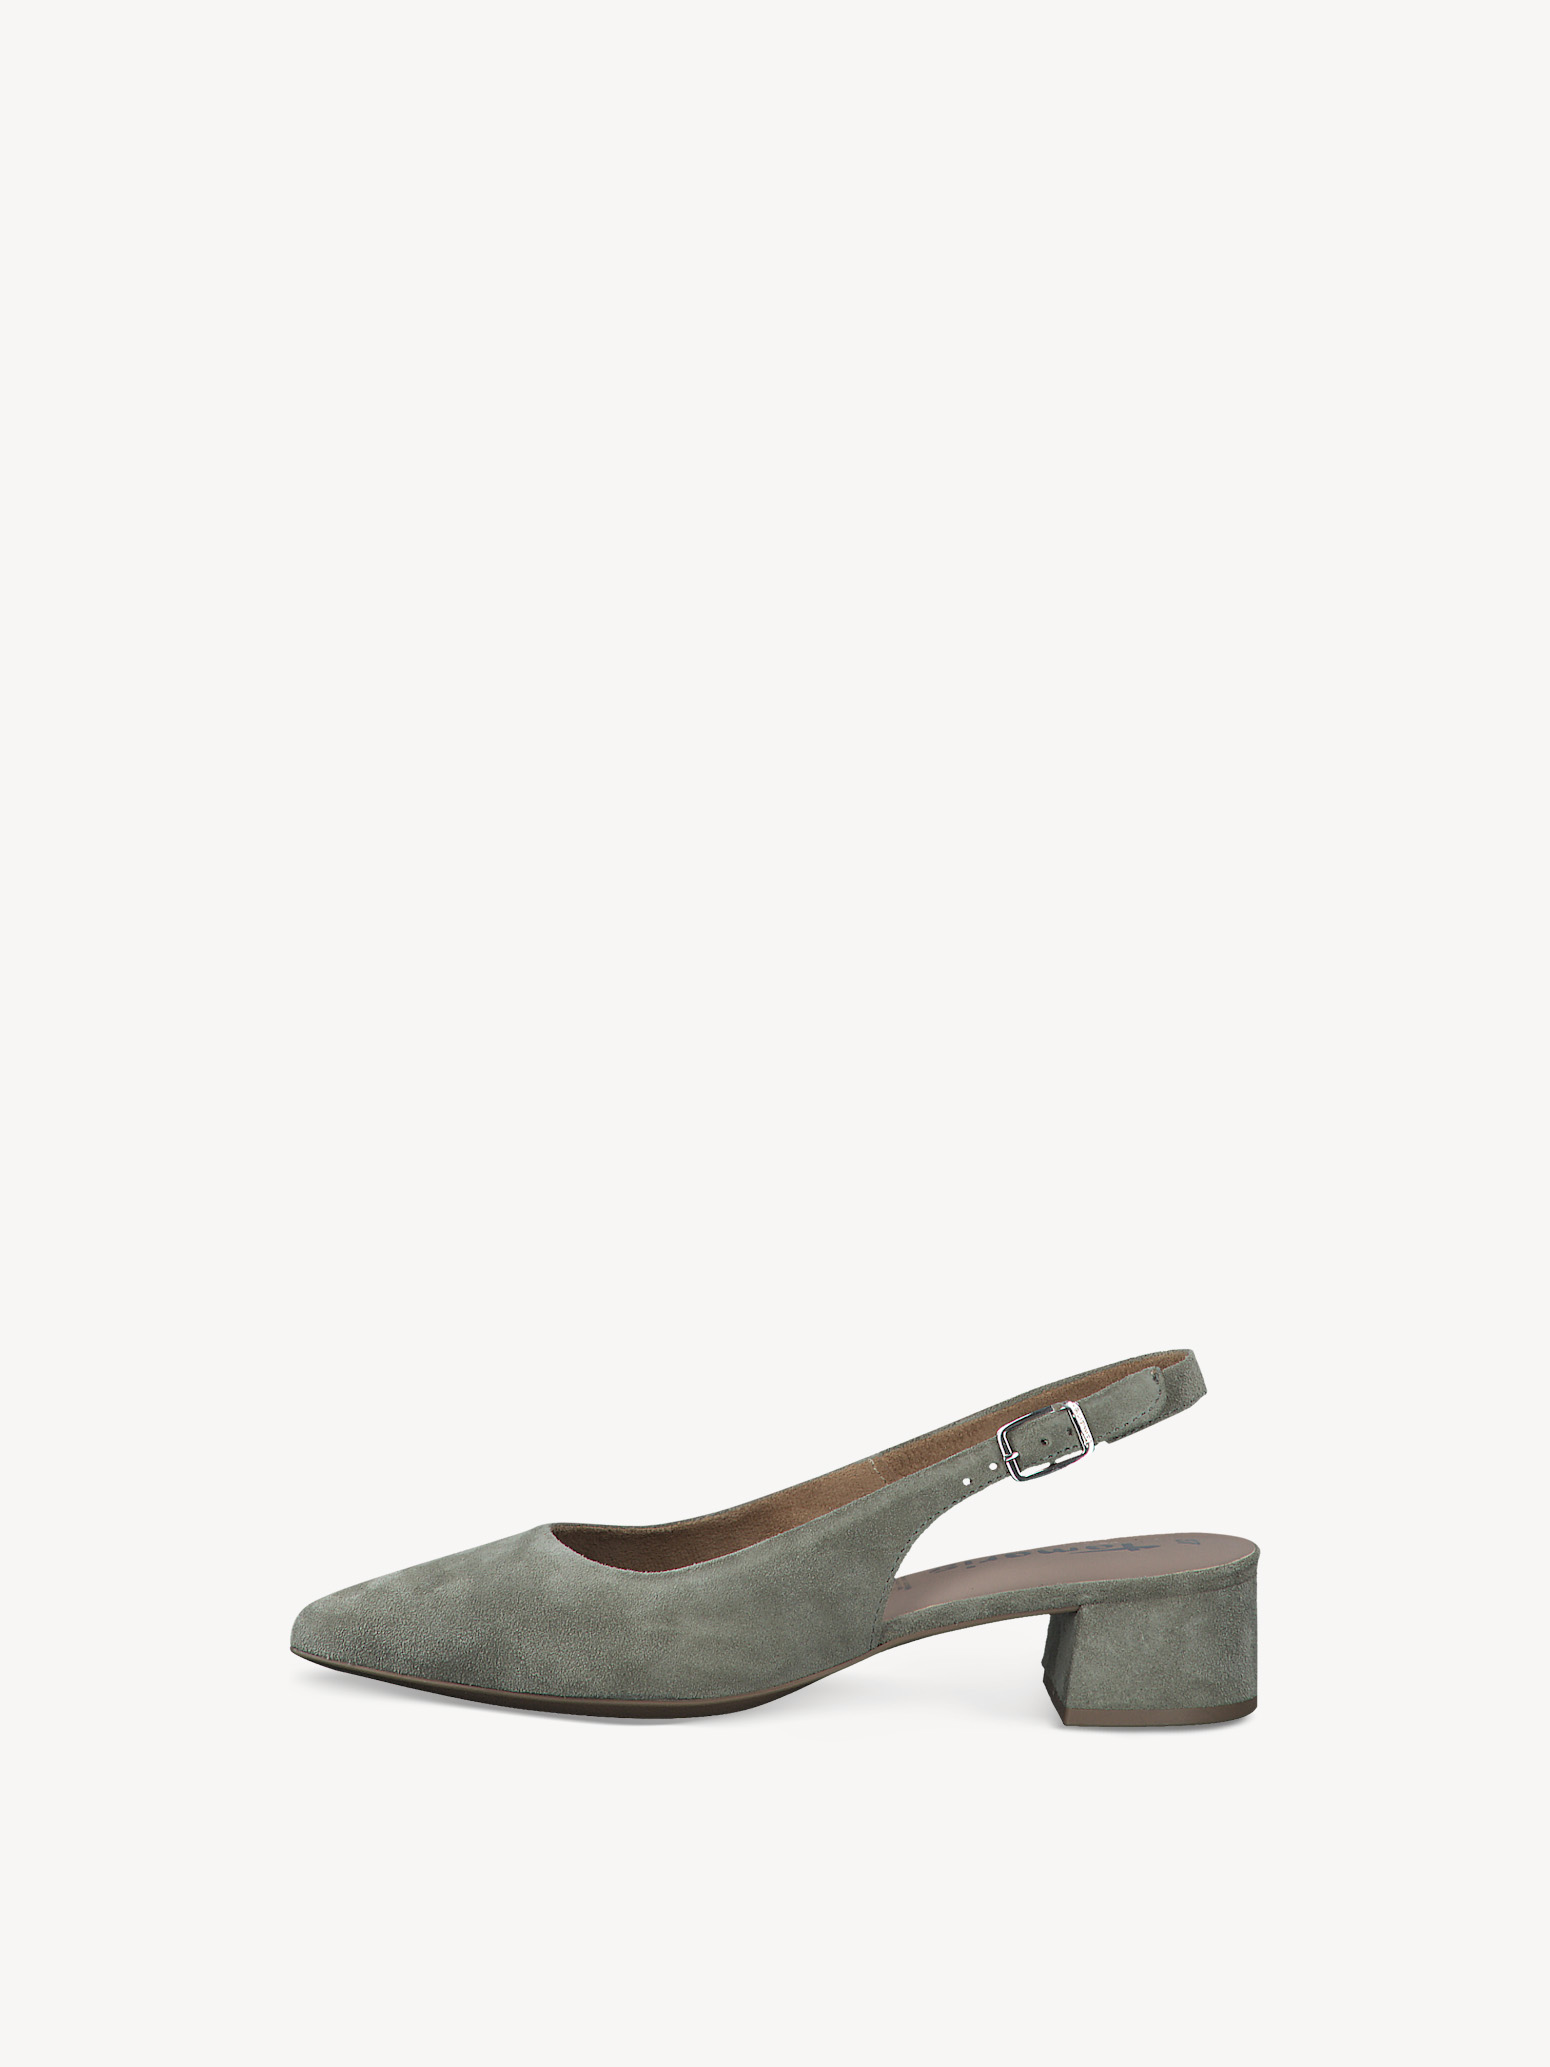 Leather sling pumps - green